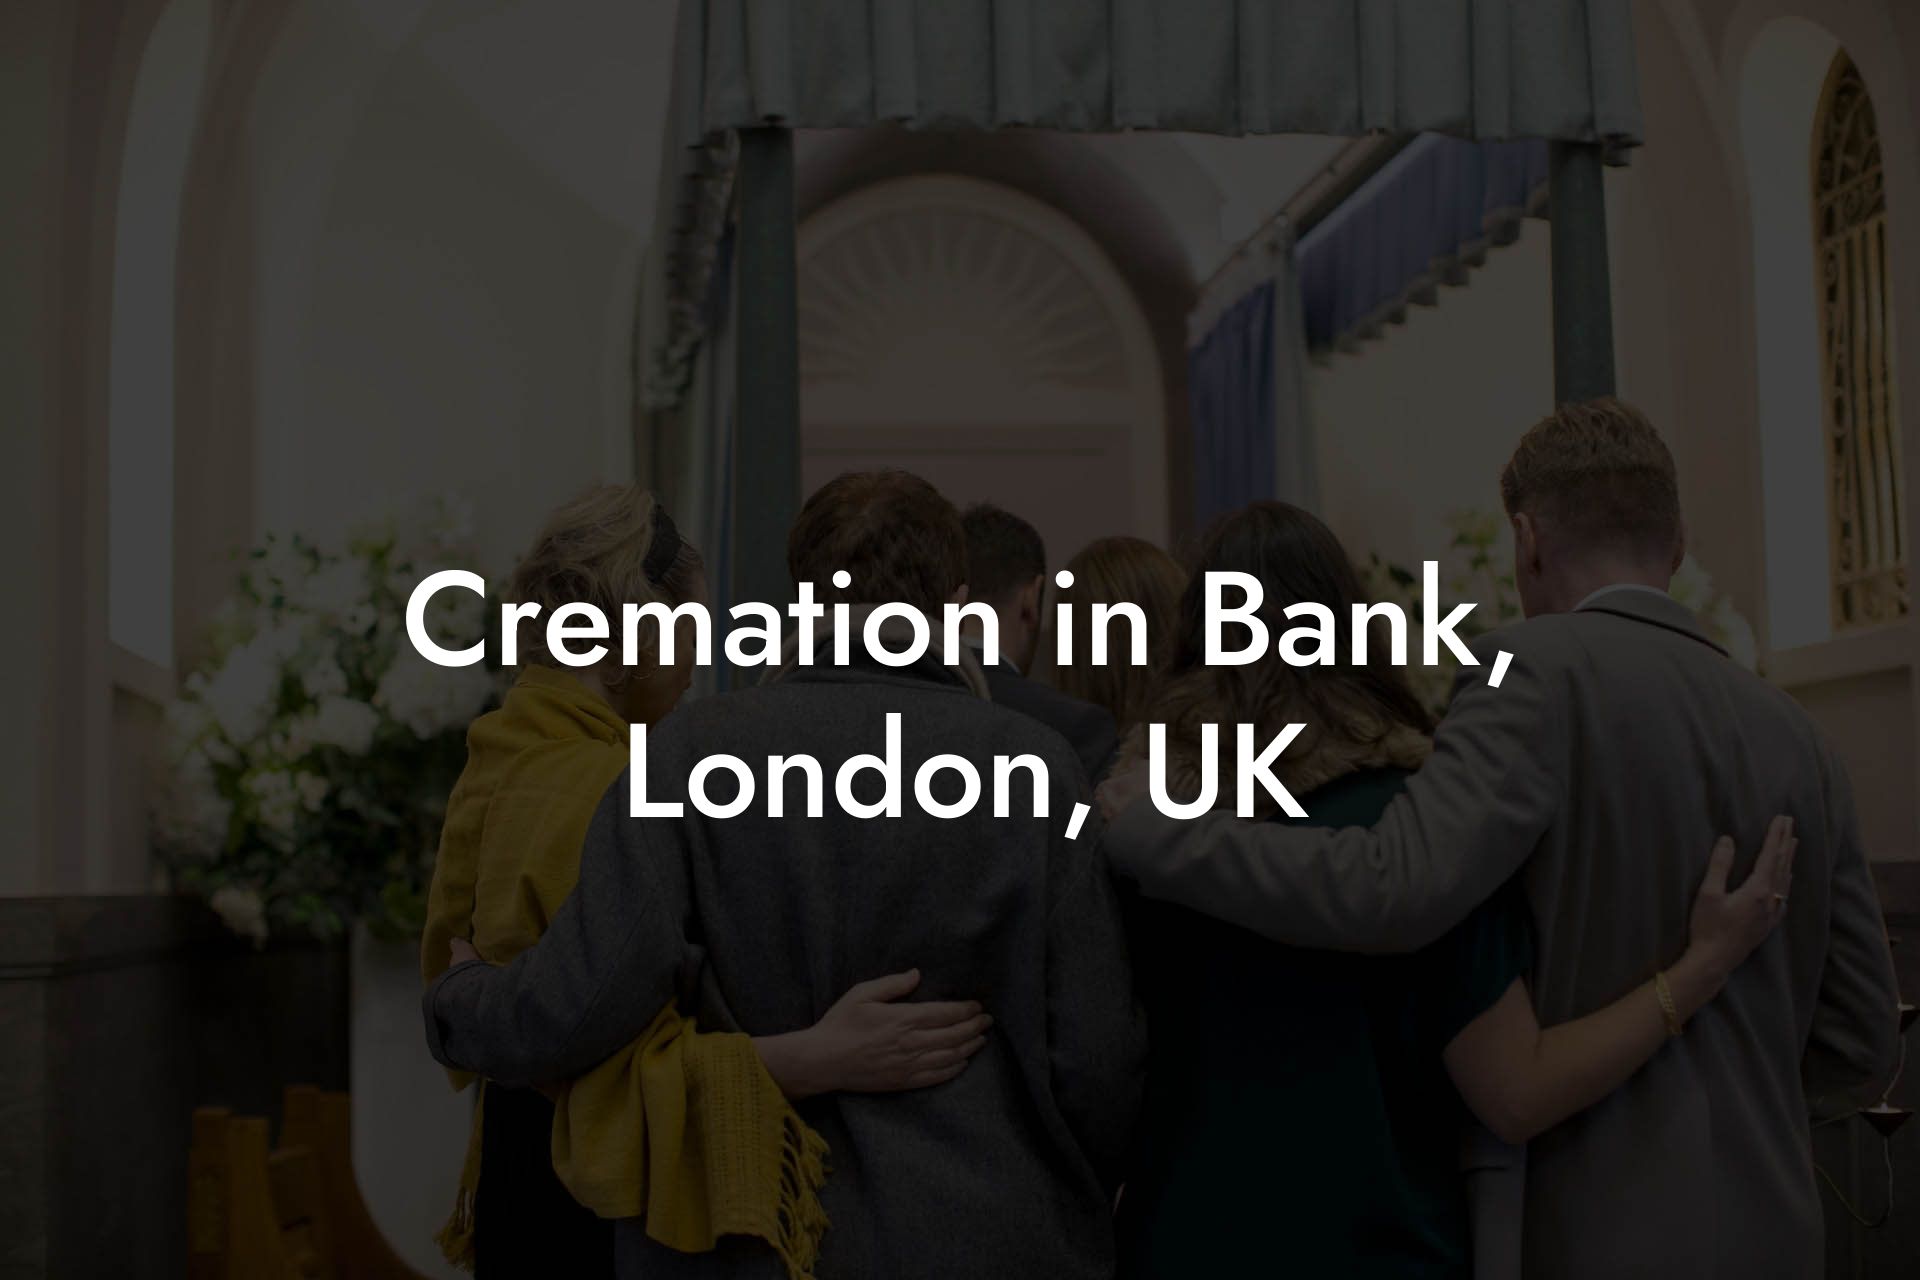 Cremation in Bank, London, UK